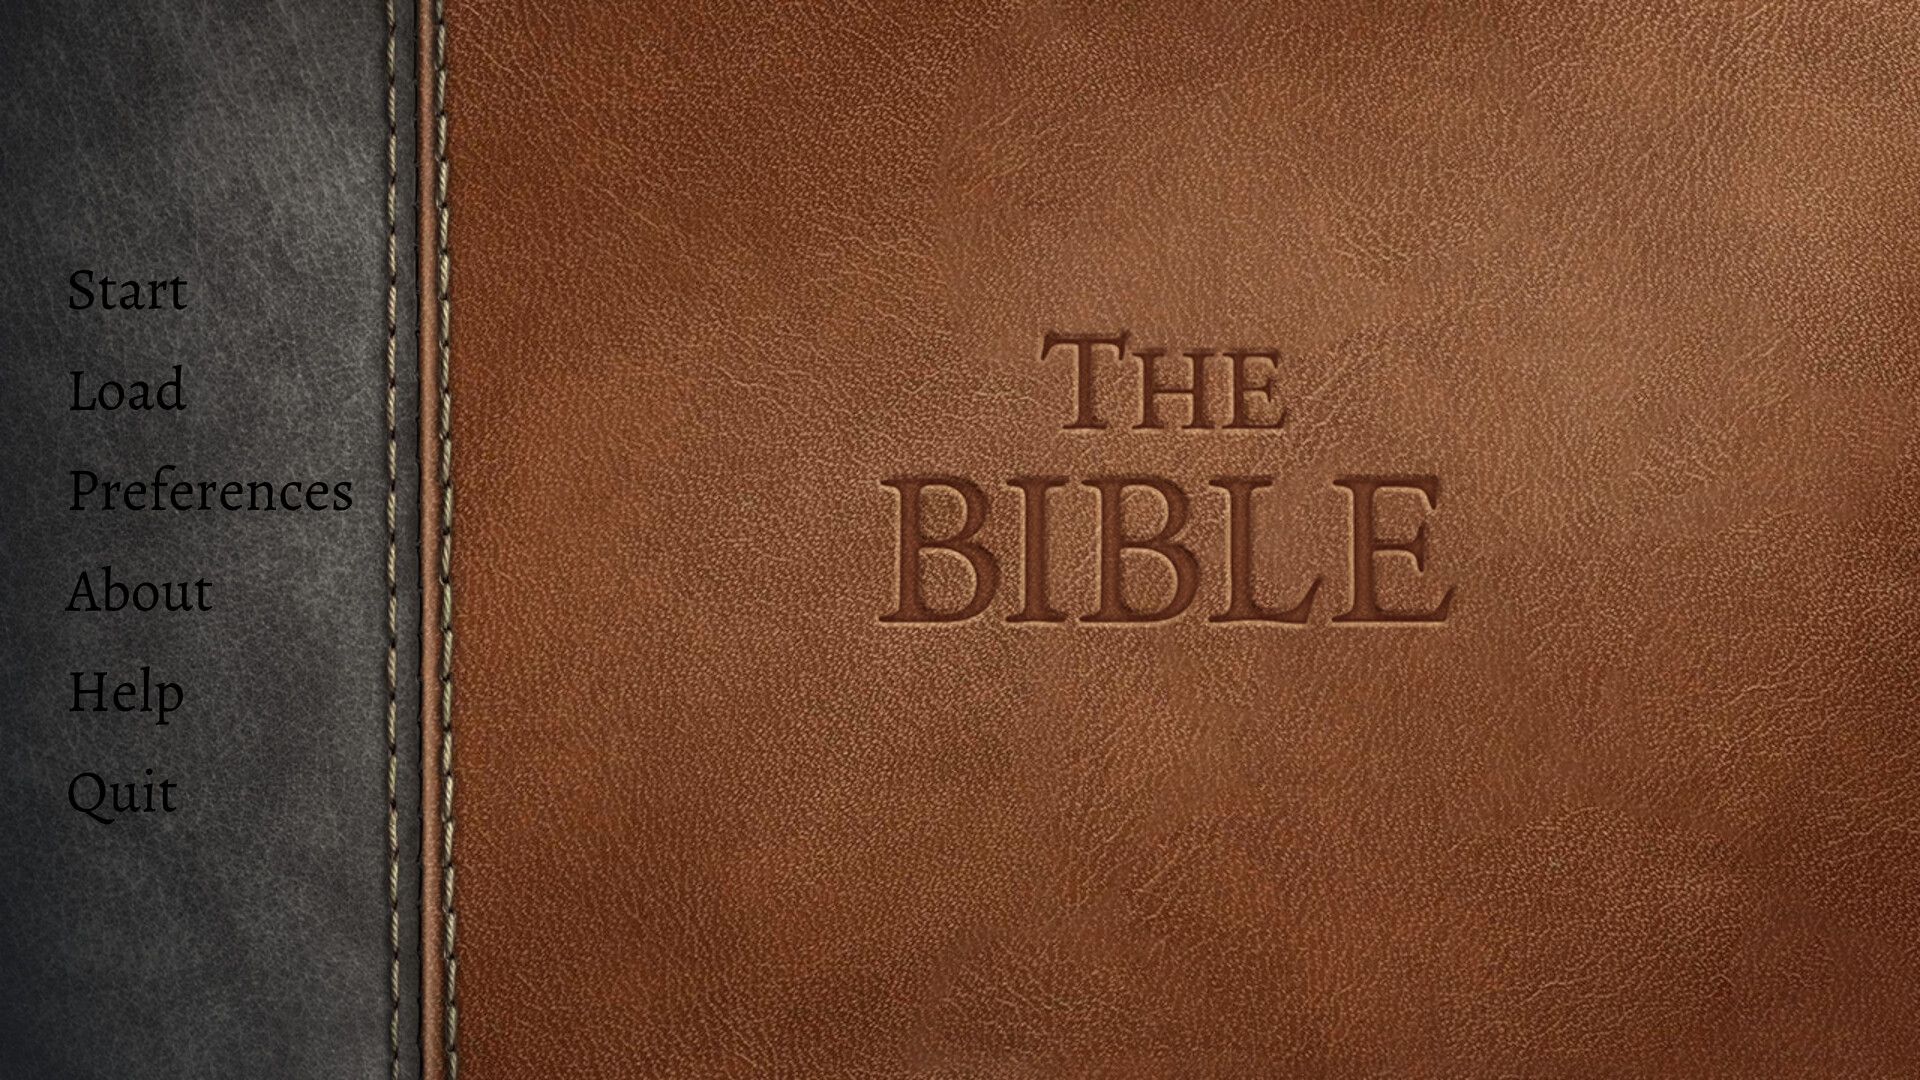 Find the best computers for The Bible